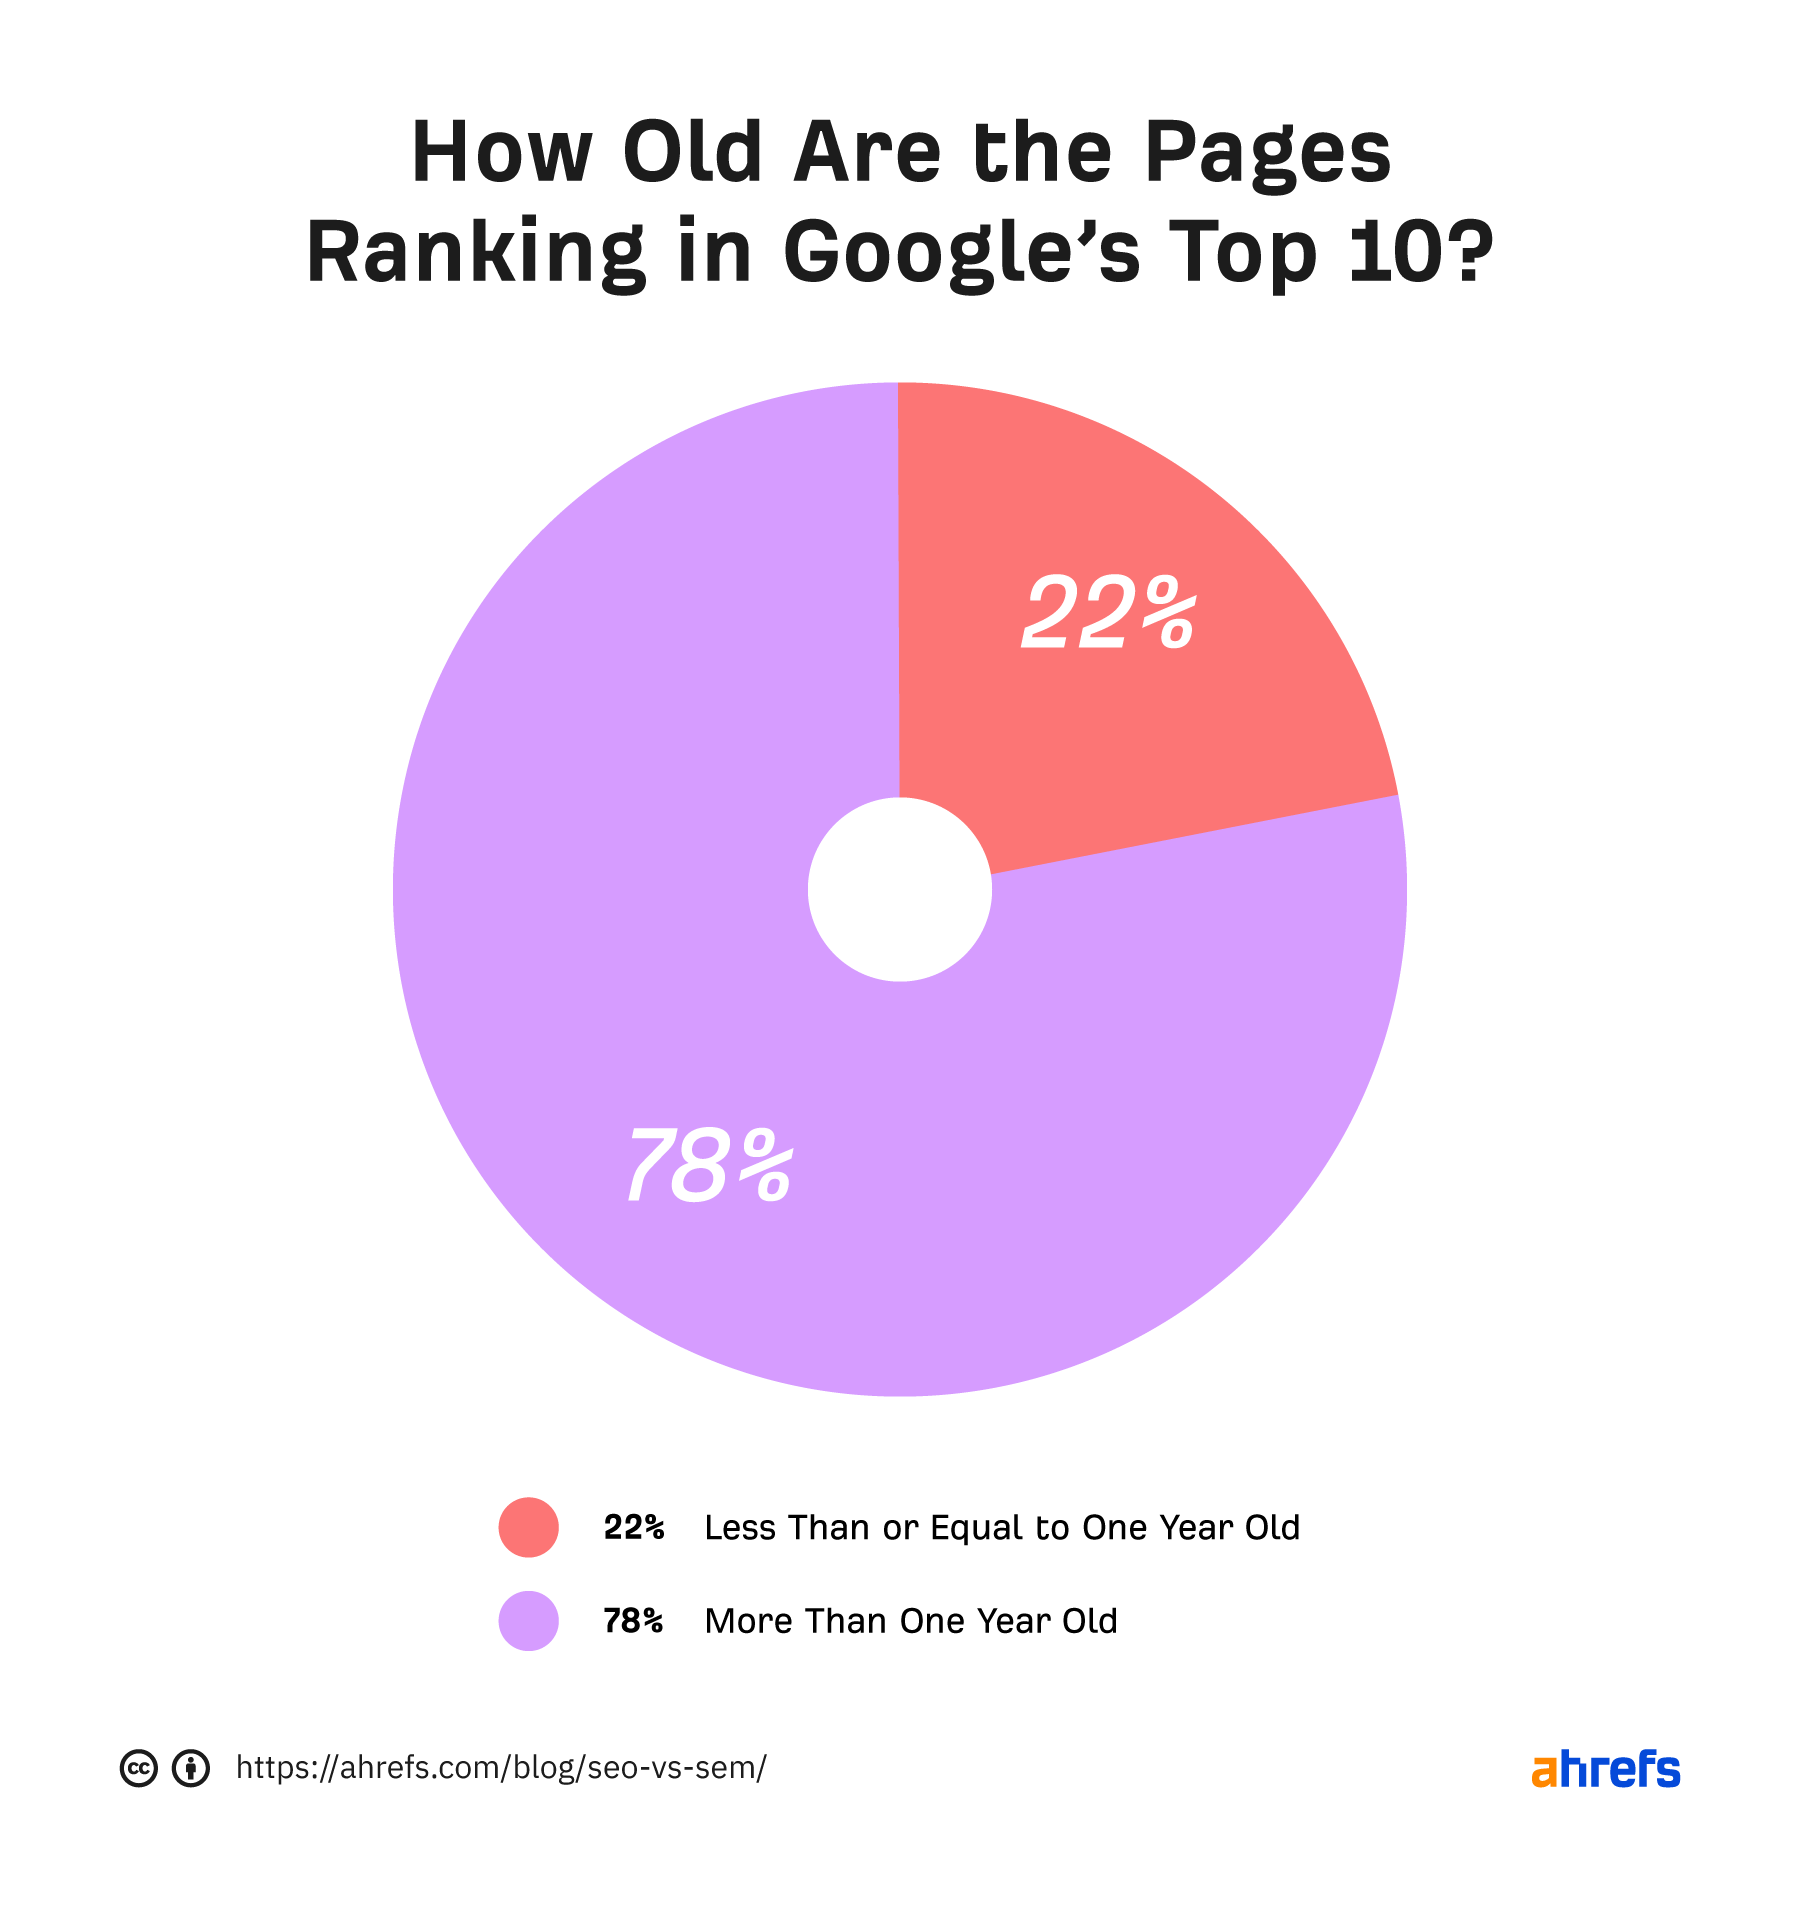 Pie chart showing how old the pages ranking in Google's top 10 are
